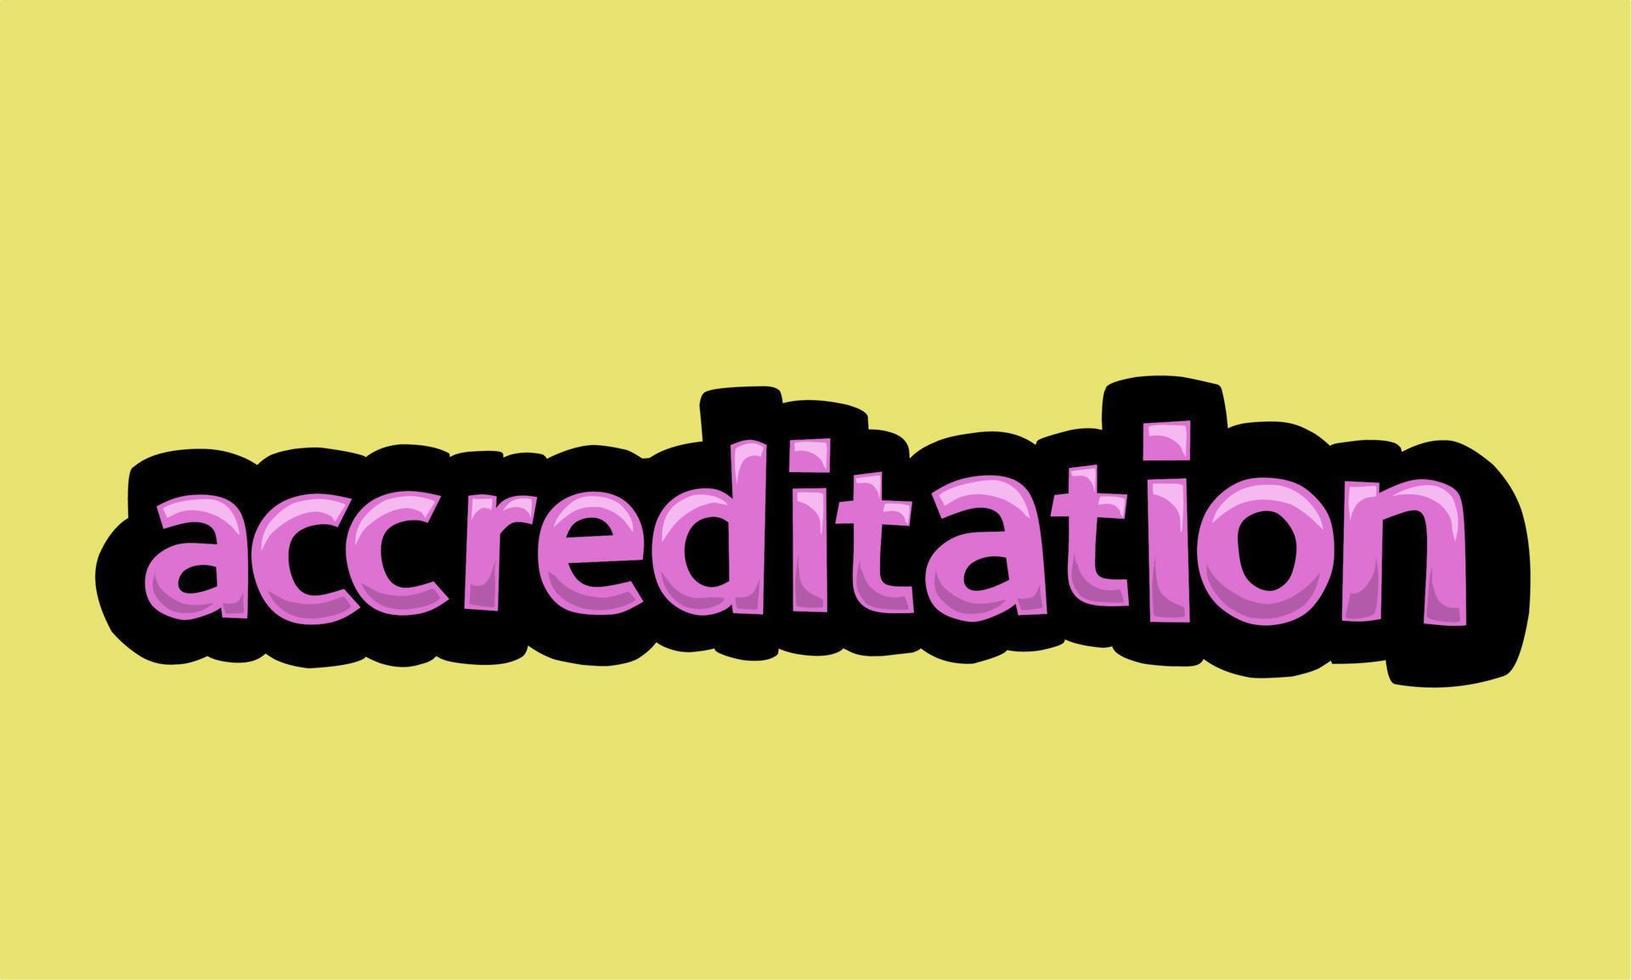 ACCREDATION writing vector design on a yellow background